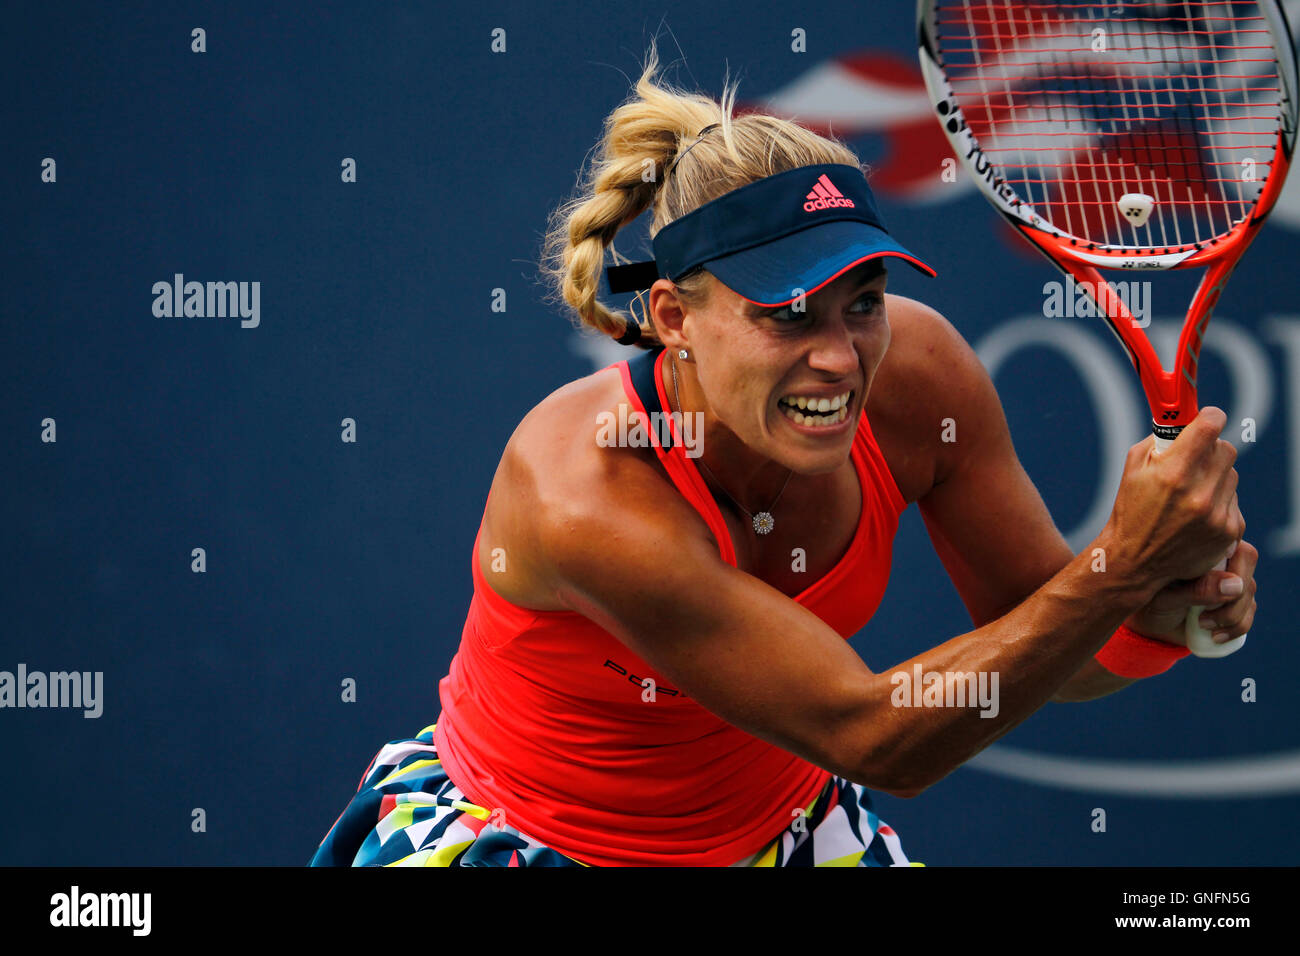 New York, United States. 31st Aug, 2016. Number 2 seed, Angelique Kerber of Germany during her second round match against Mirjana Lucic-Baroni of Croatia at the United States Open Tennis Championships at Flushing Meadows, New York on Wednesday, August 31st. Credit:  Adam Stoltman/Alamy Live News Stock Photo